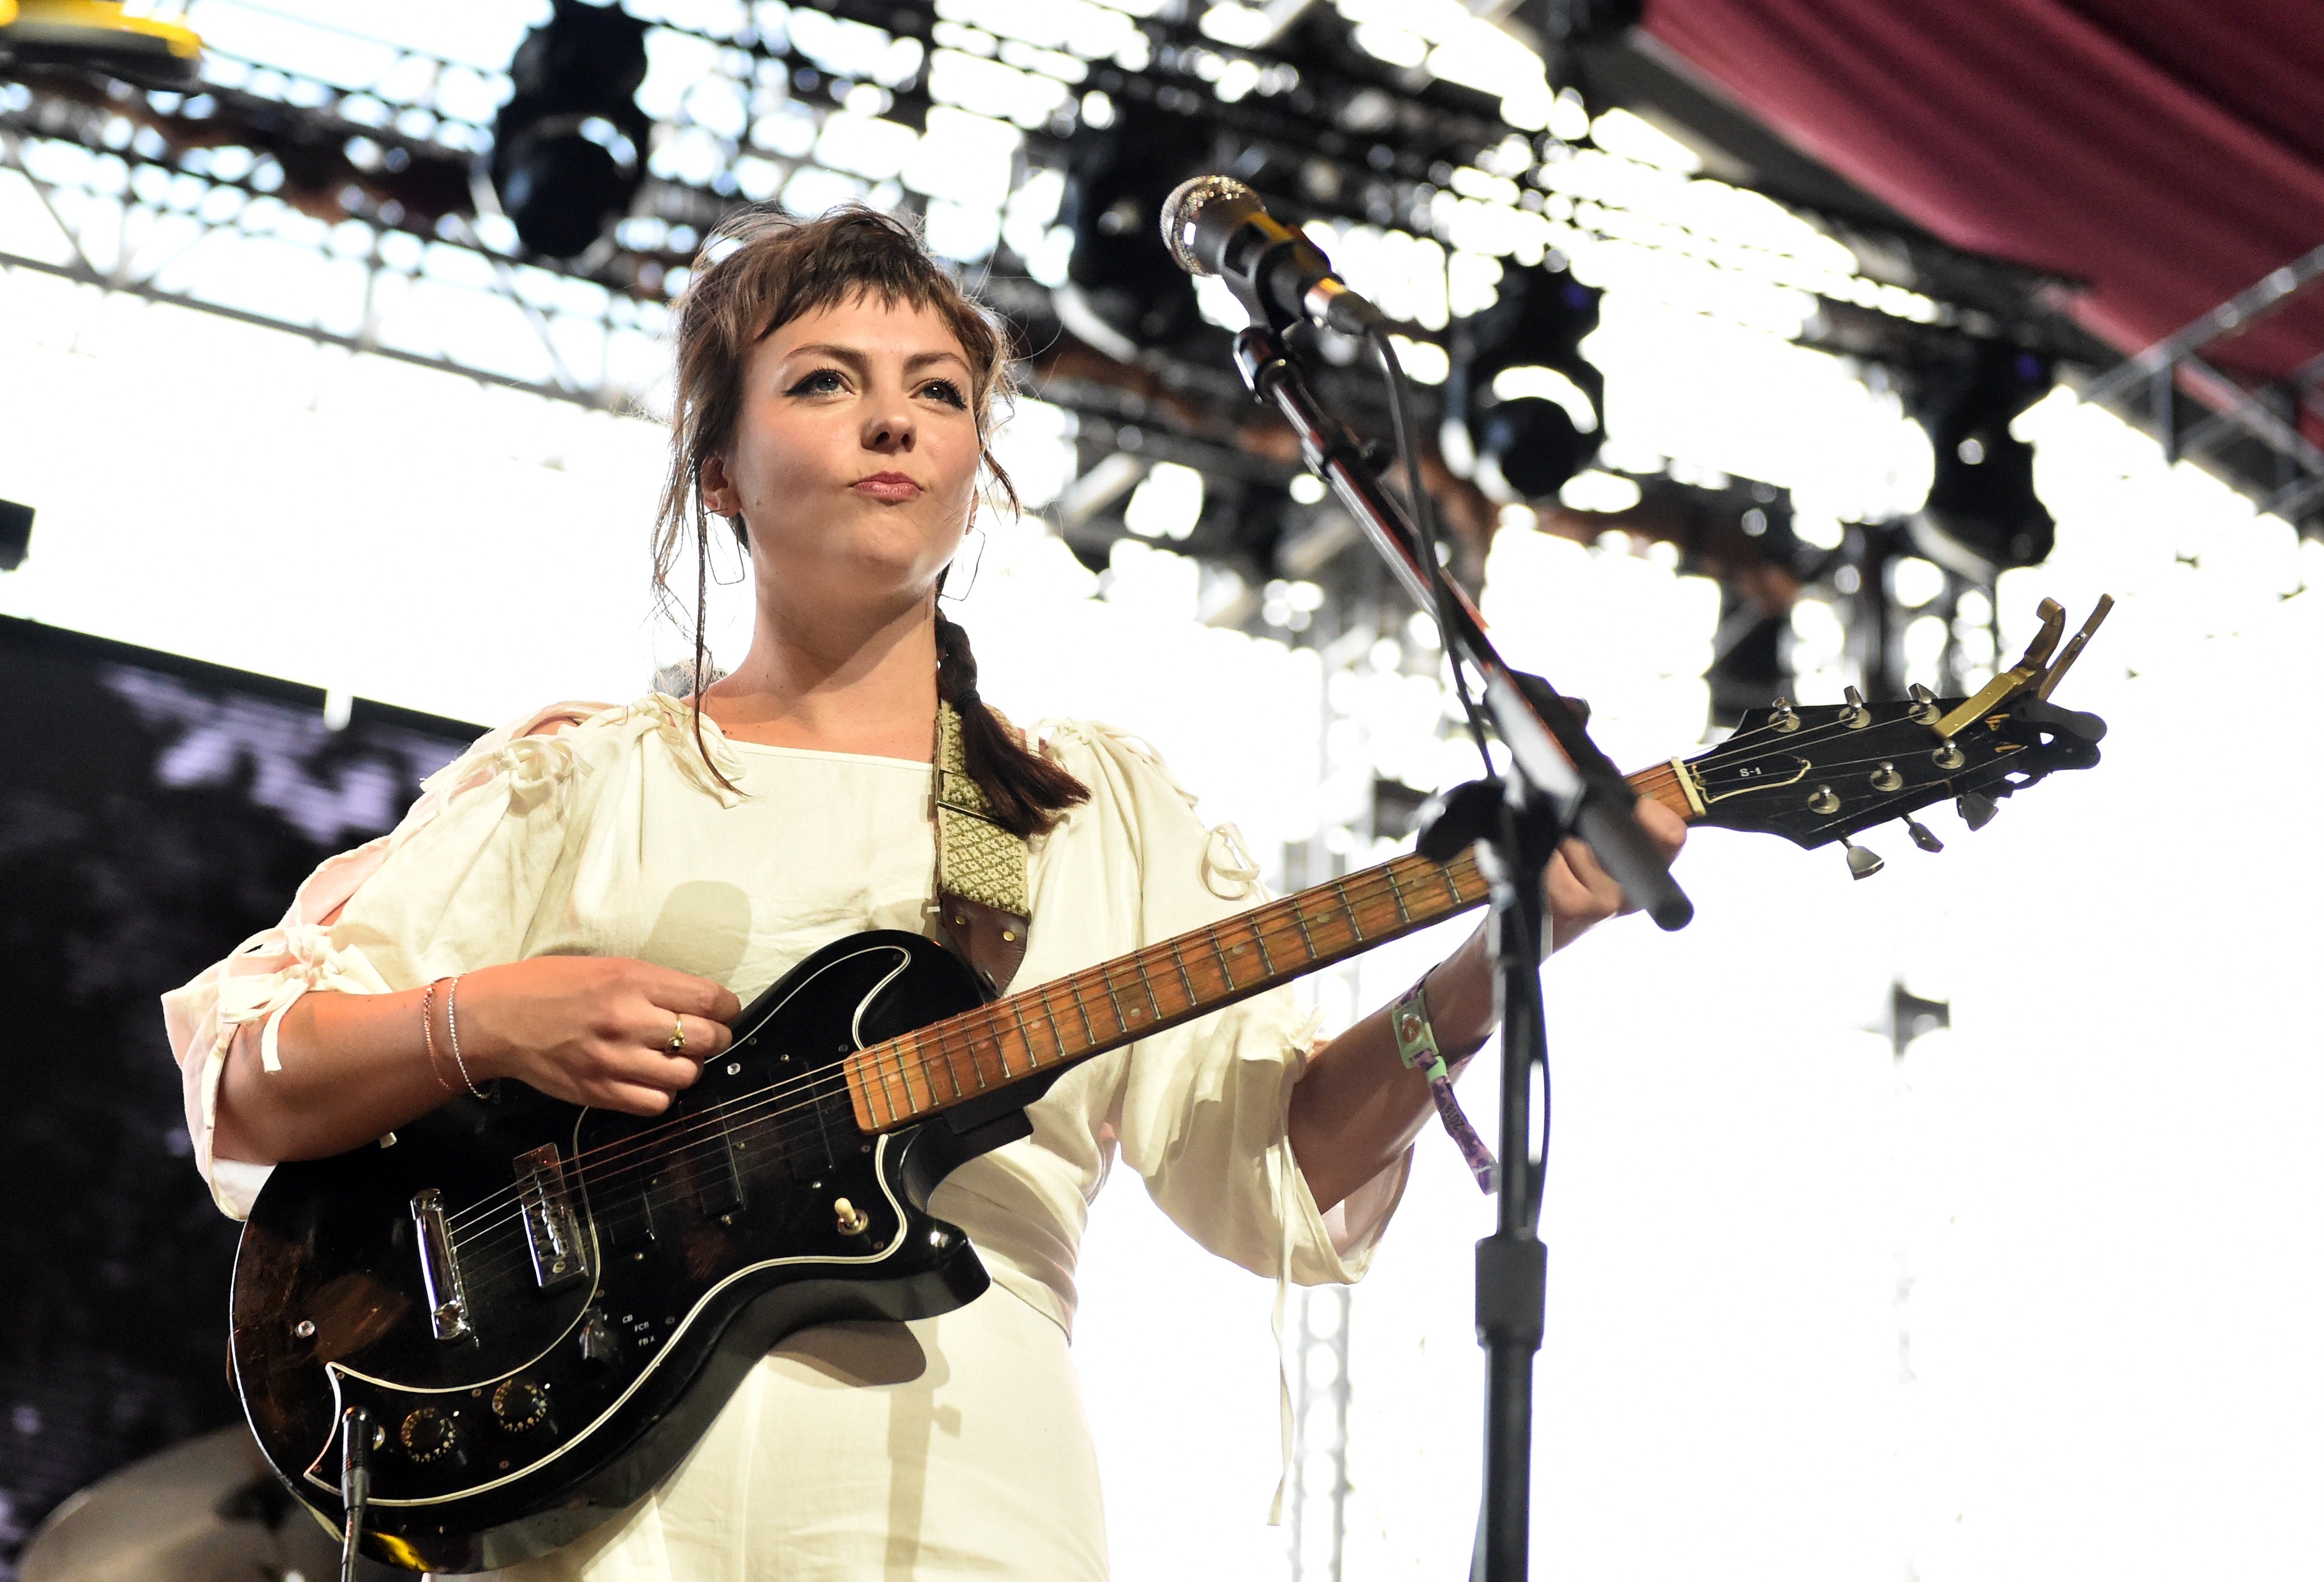 Angel Olsen is one of many contemporary artists to have covered or paid tribute to Cline